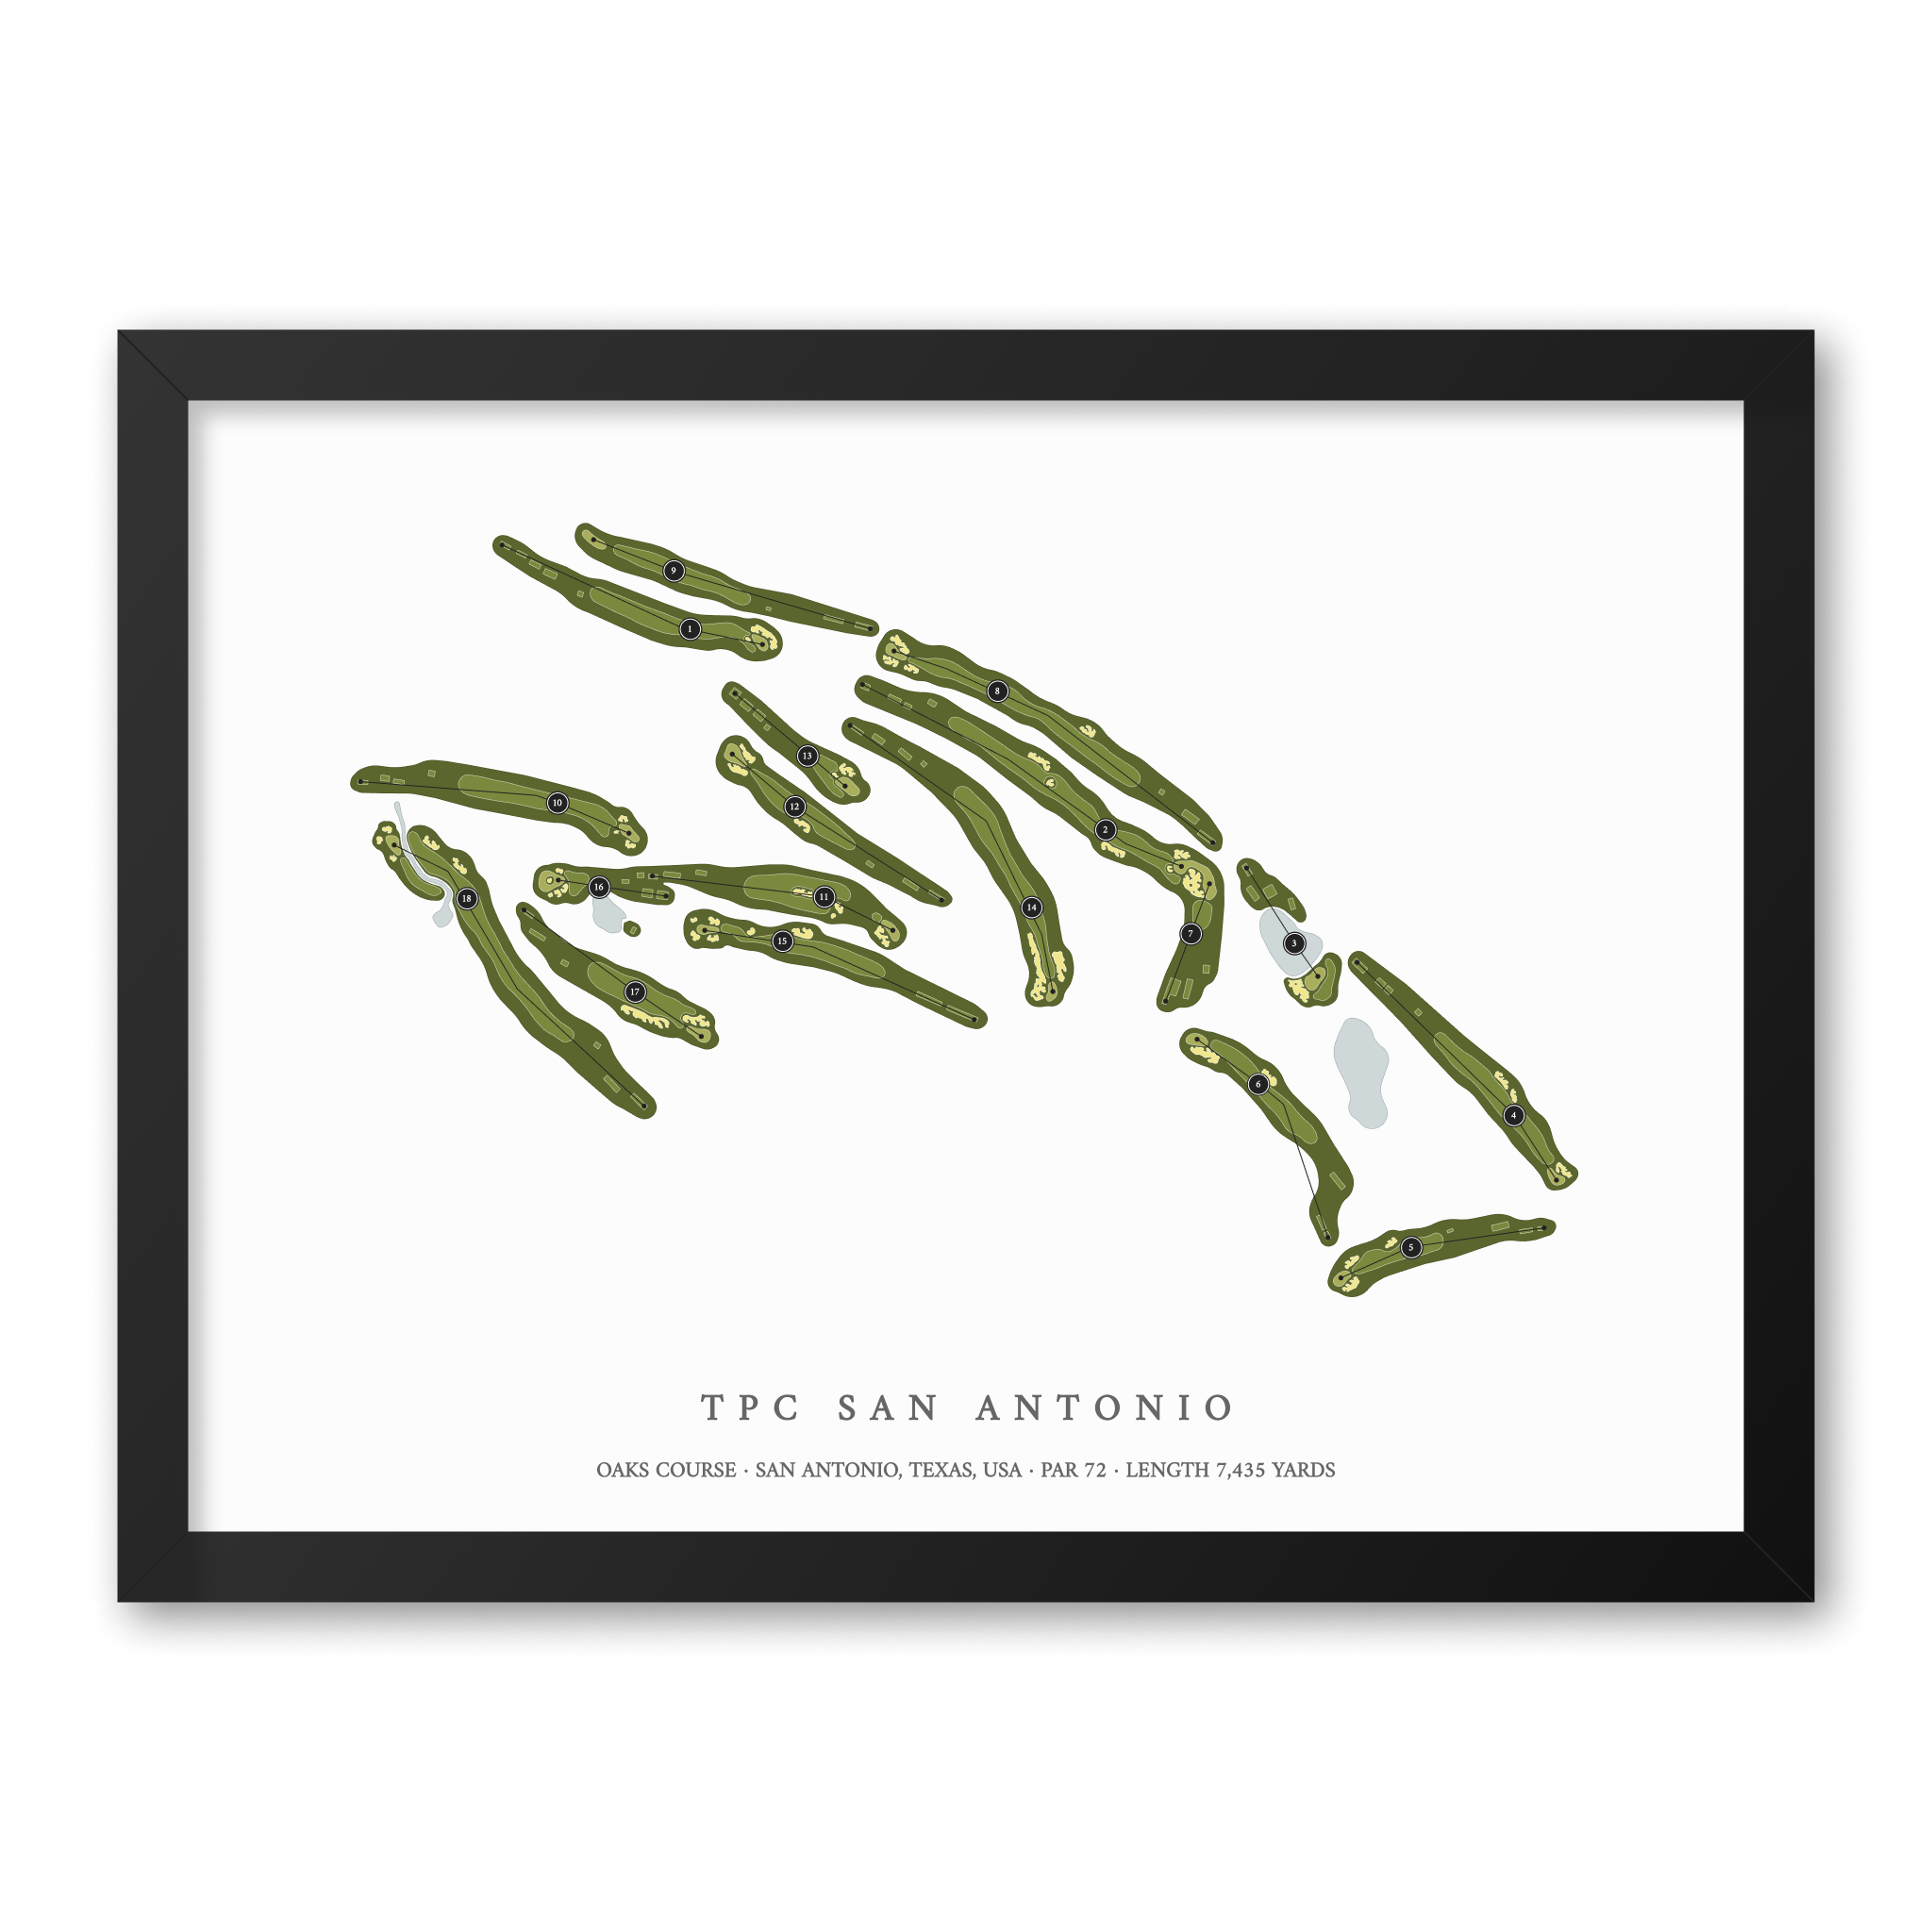 TPC San Antonio - Oaks Course| Golf Course Print | Black Frame With Hole Numbers #hole numbers_yes